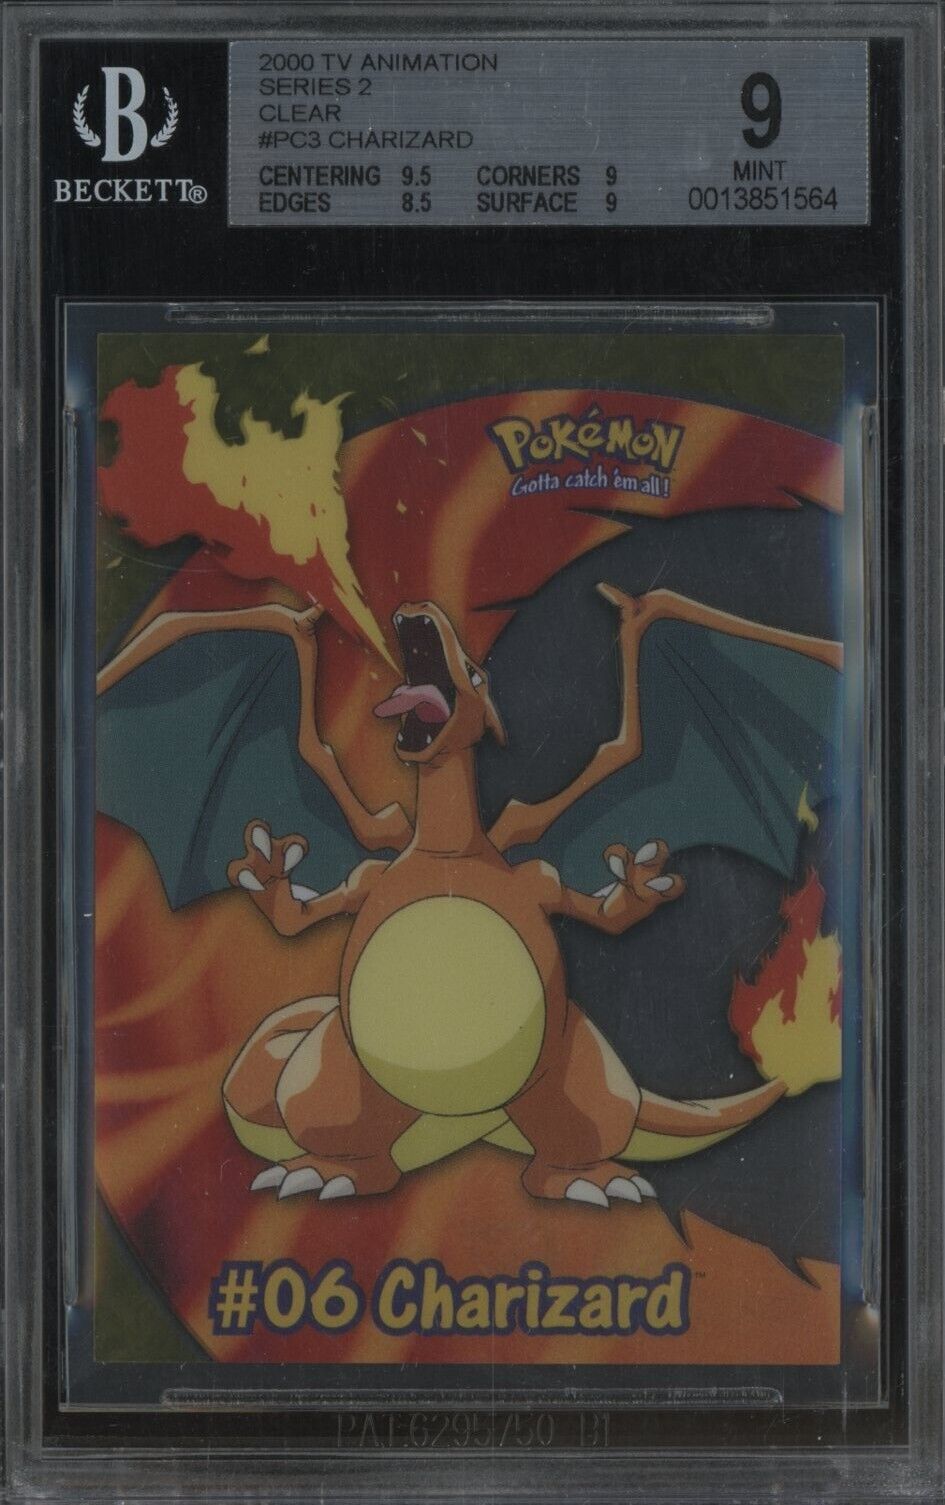 2000 Topps Pokemon TV Animation Series 2 Clear #PC3 Charizard BGS 9 w/ 9.5